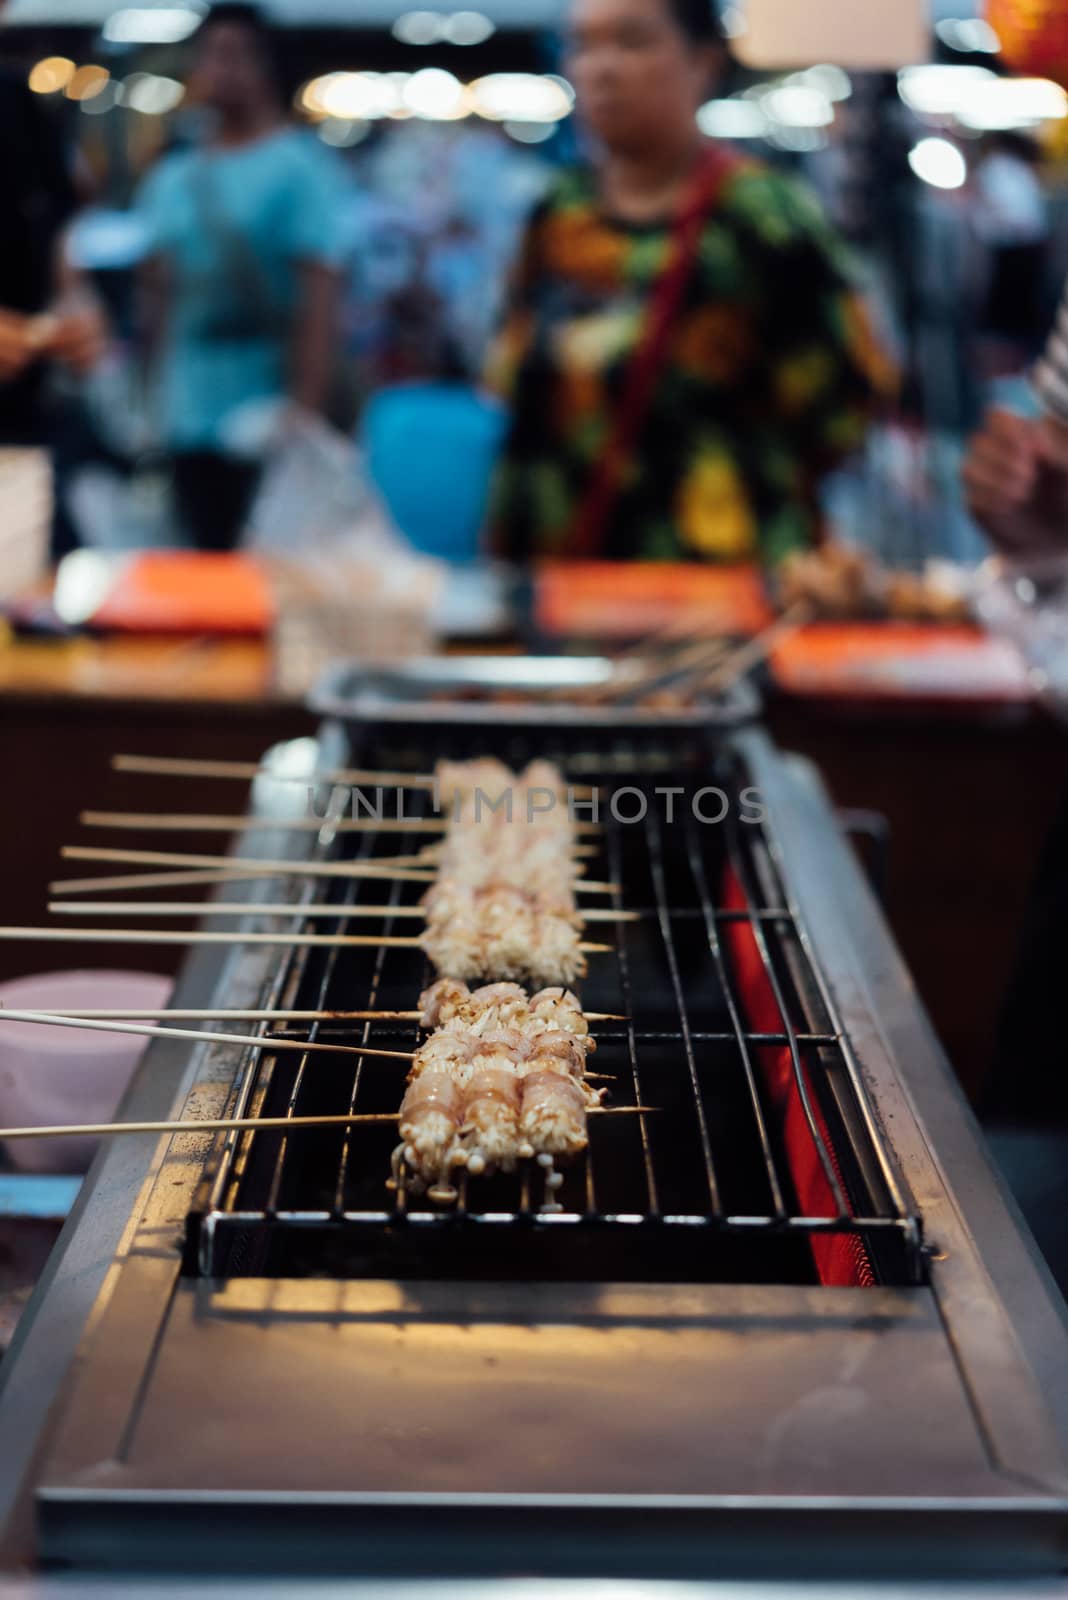 Mala is Grilled meat (Beef, Pork, Chickens or Mushroom) with chilli sauce and chinese hot spicy herb (Sichuan Pepper) for sale at Thai street food market or restaurant in Bangkok Thailand